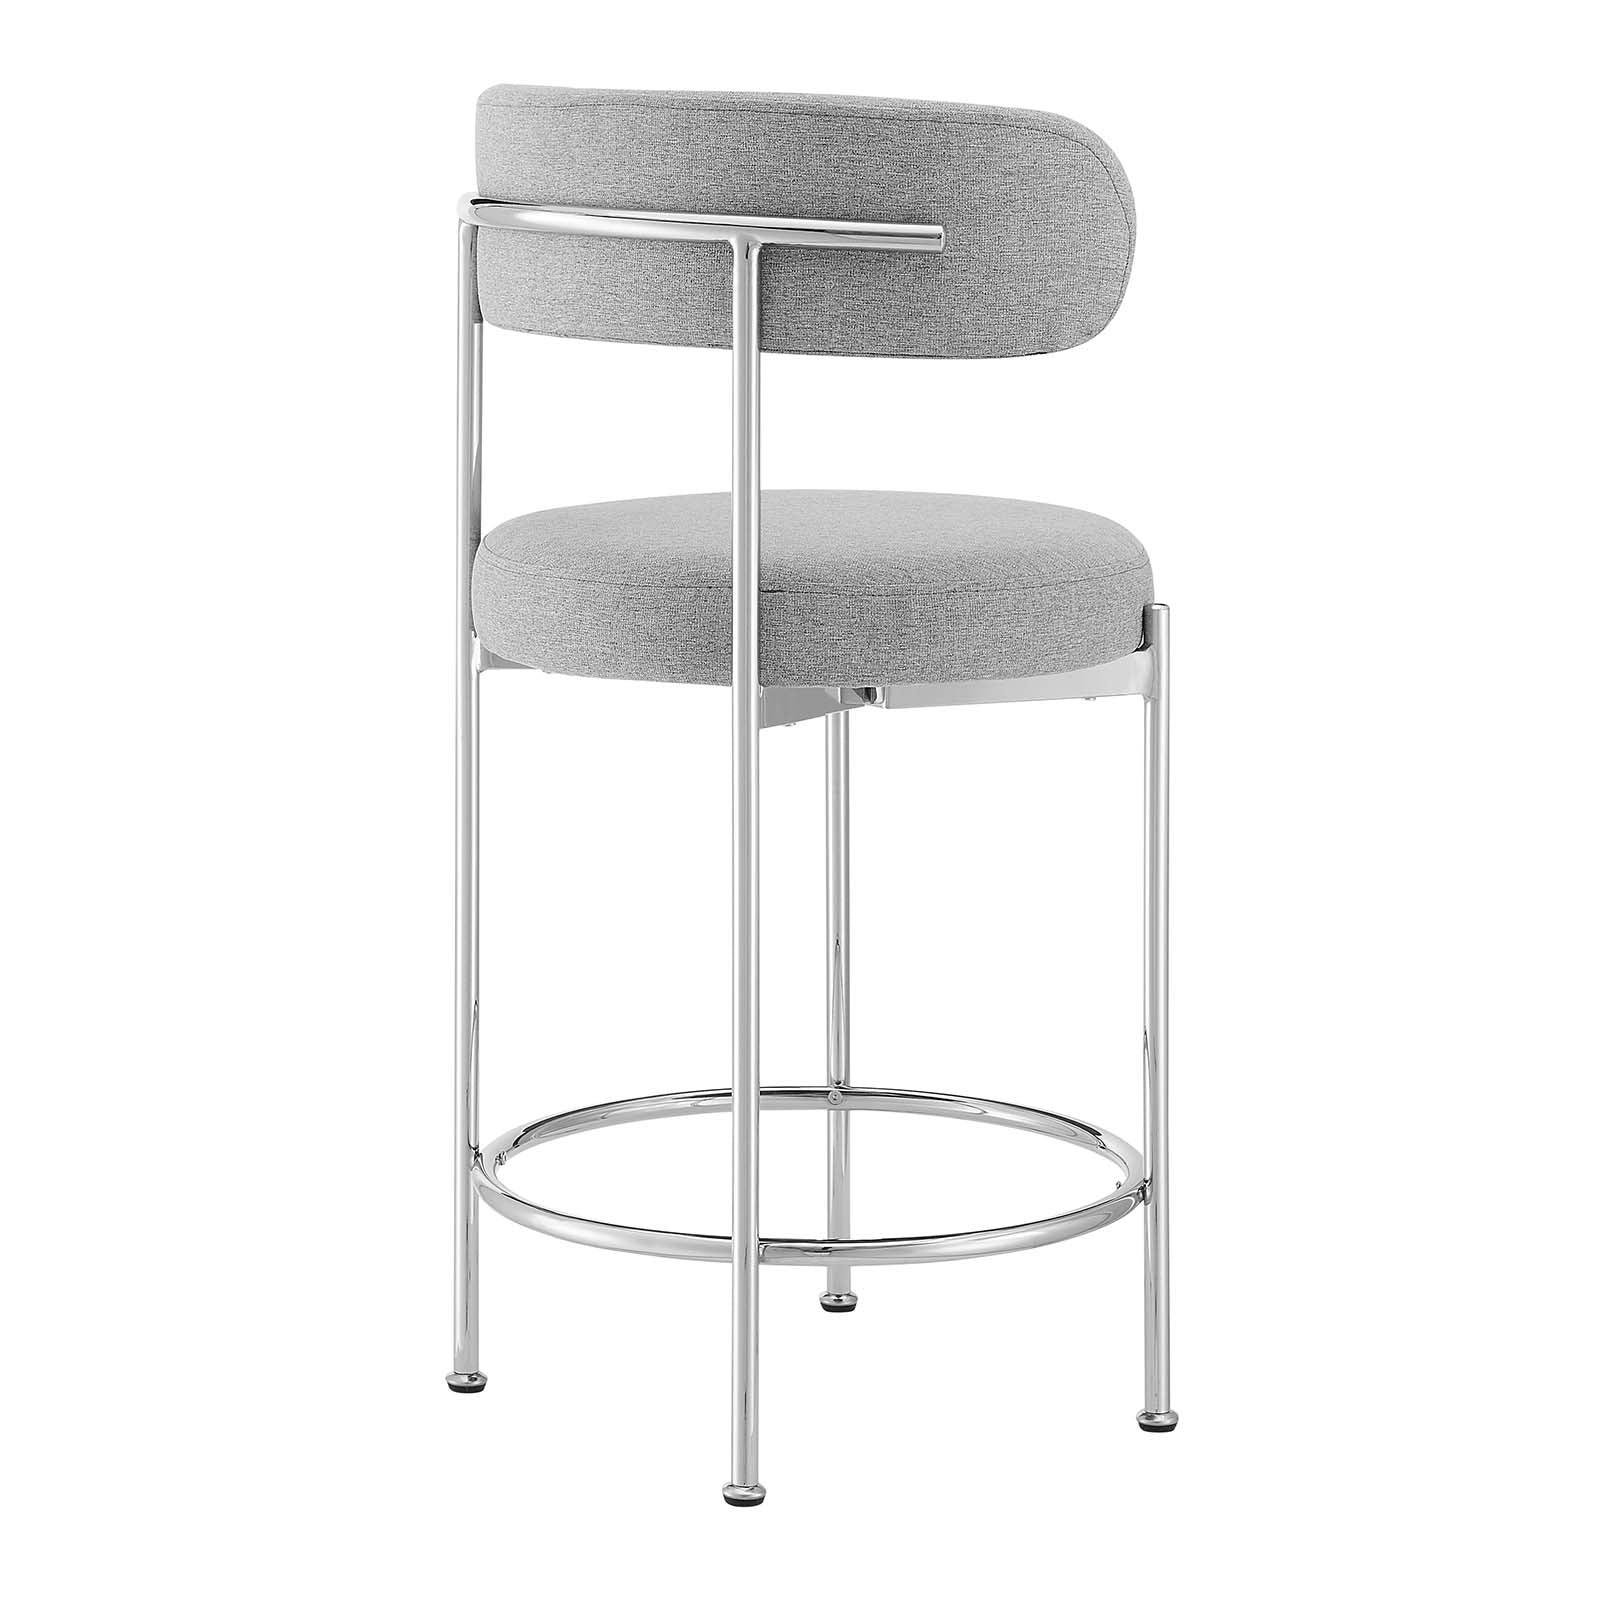 Albie Fabric Counter Stools - Set of 2 - East Shore Modern Home Furnishings